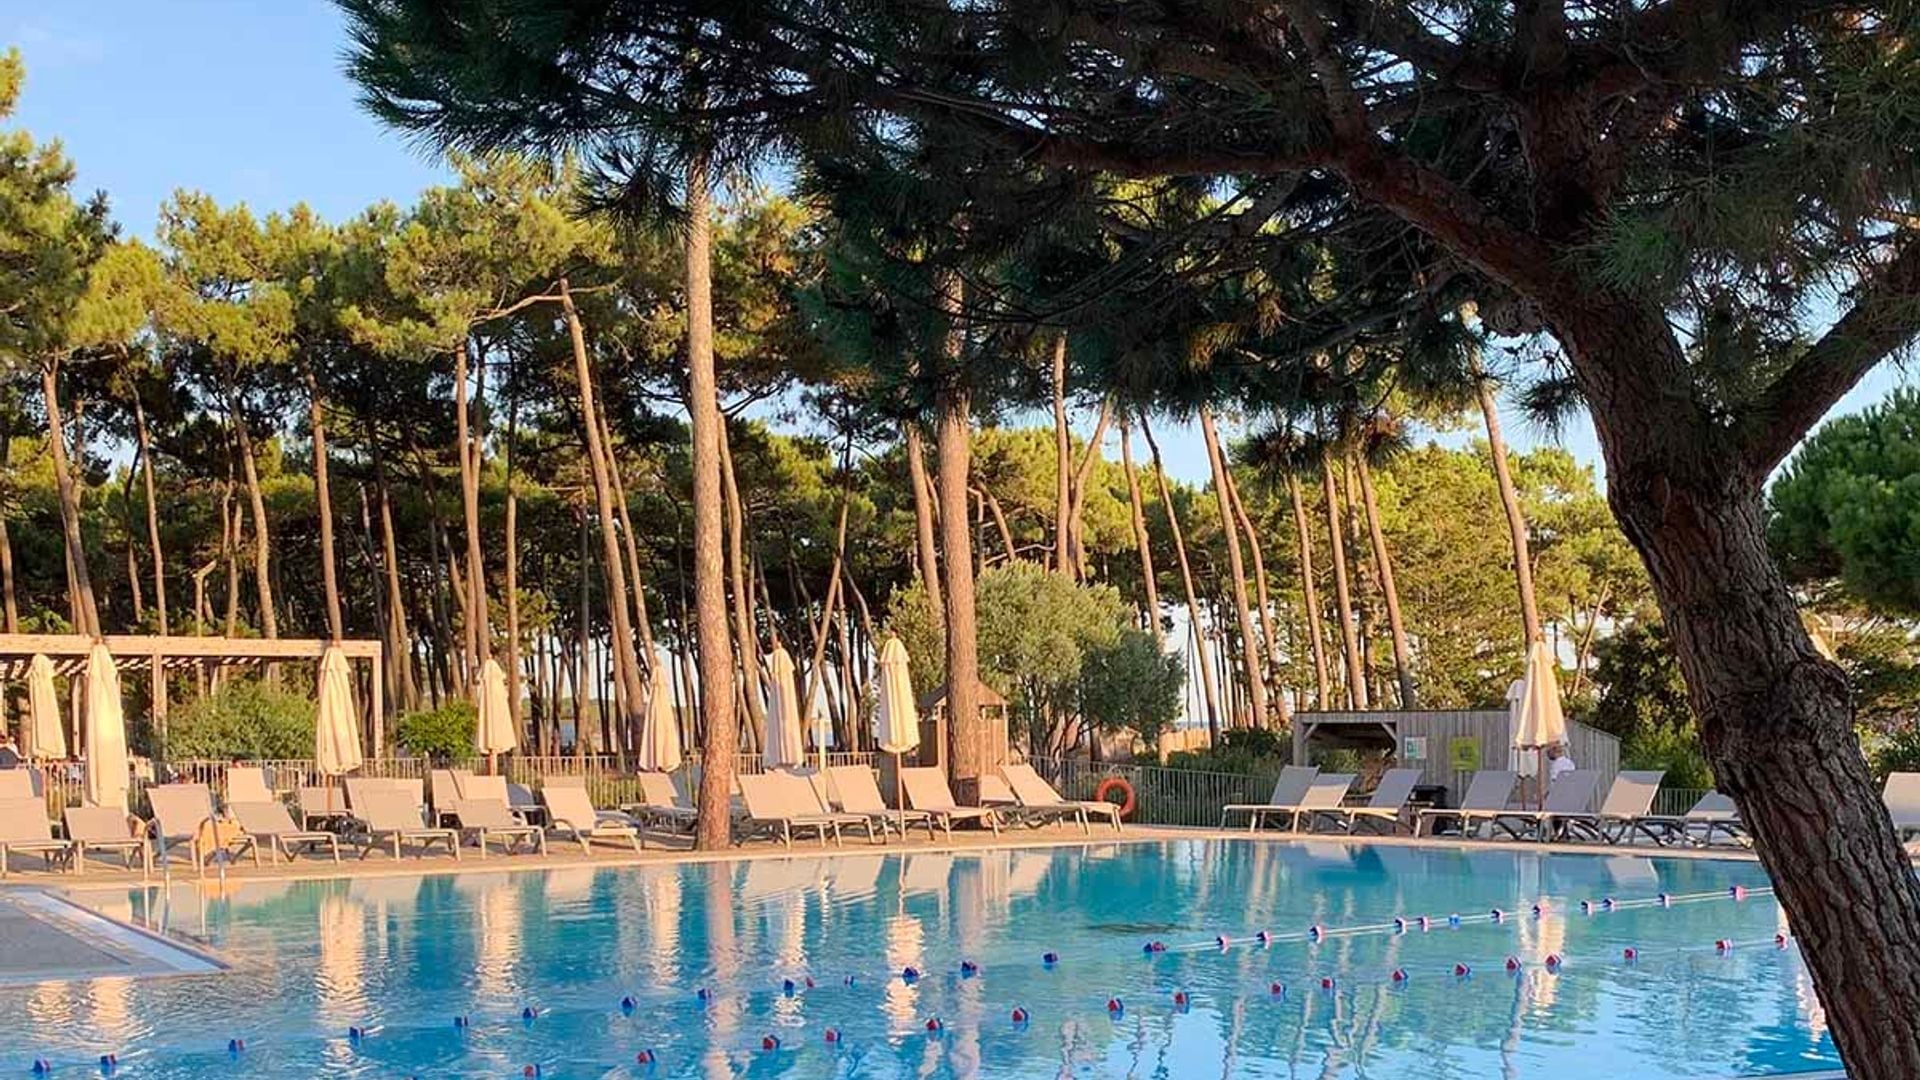 Club Med La Palmyre France review: an amazing family holiday